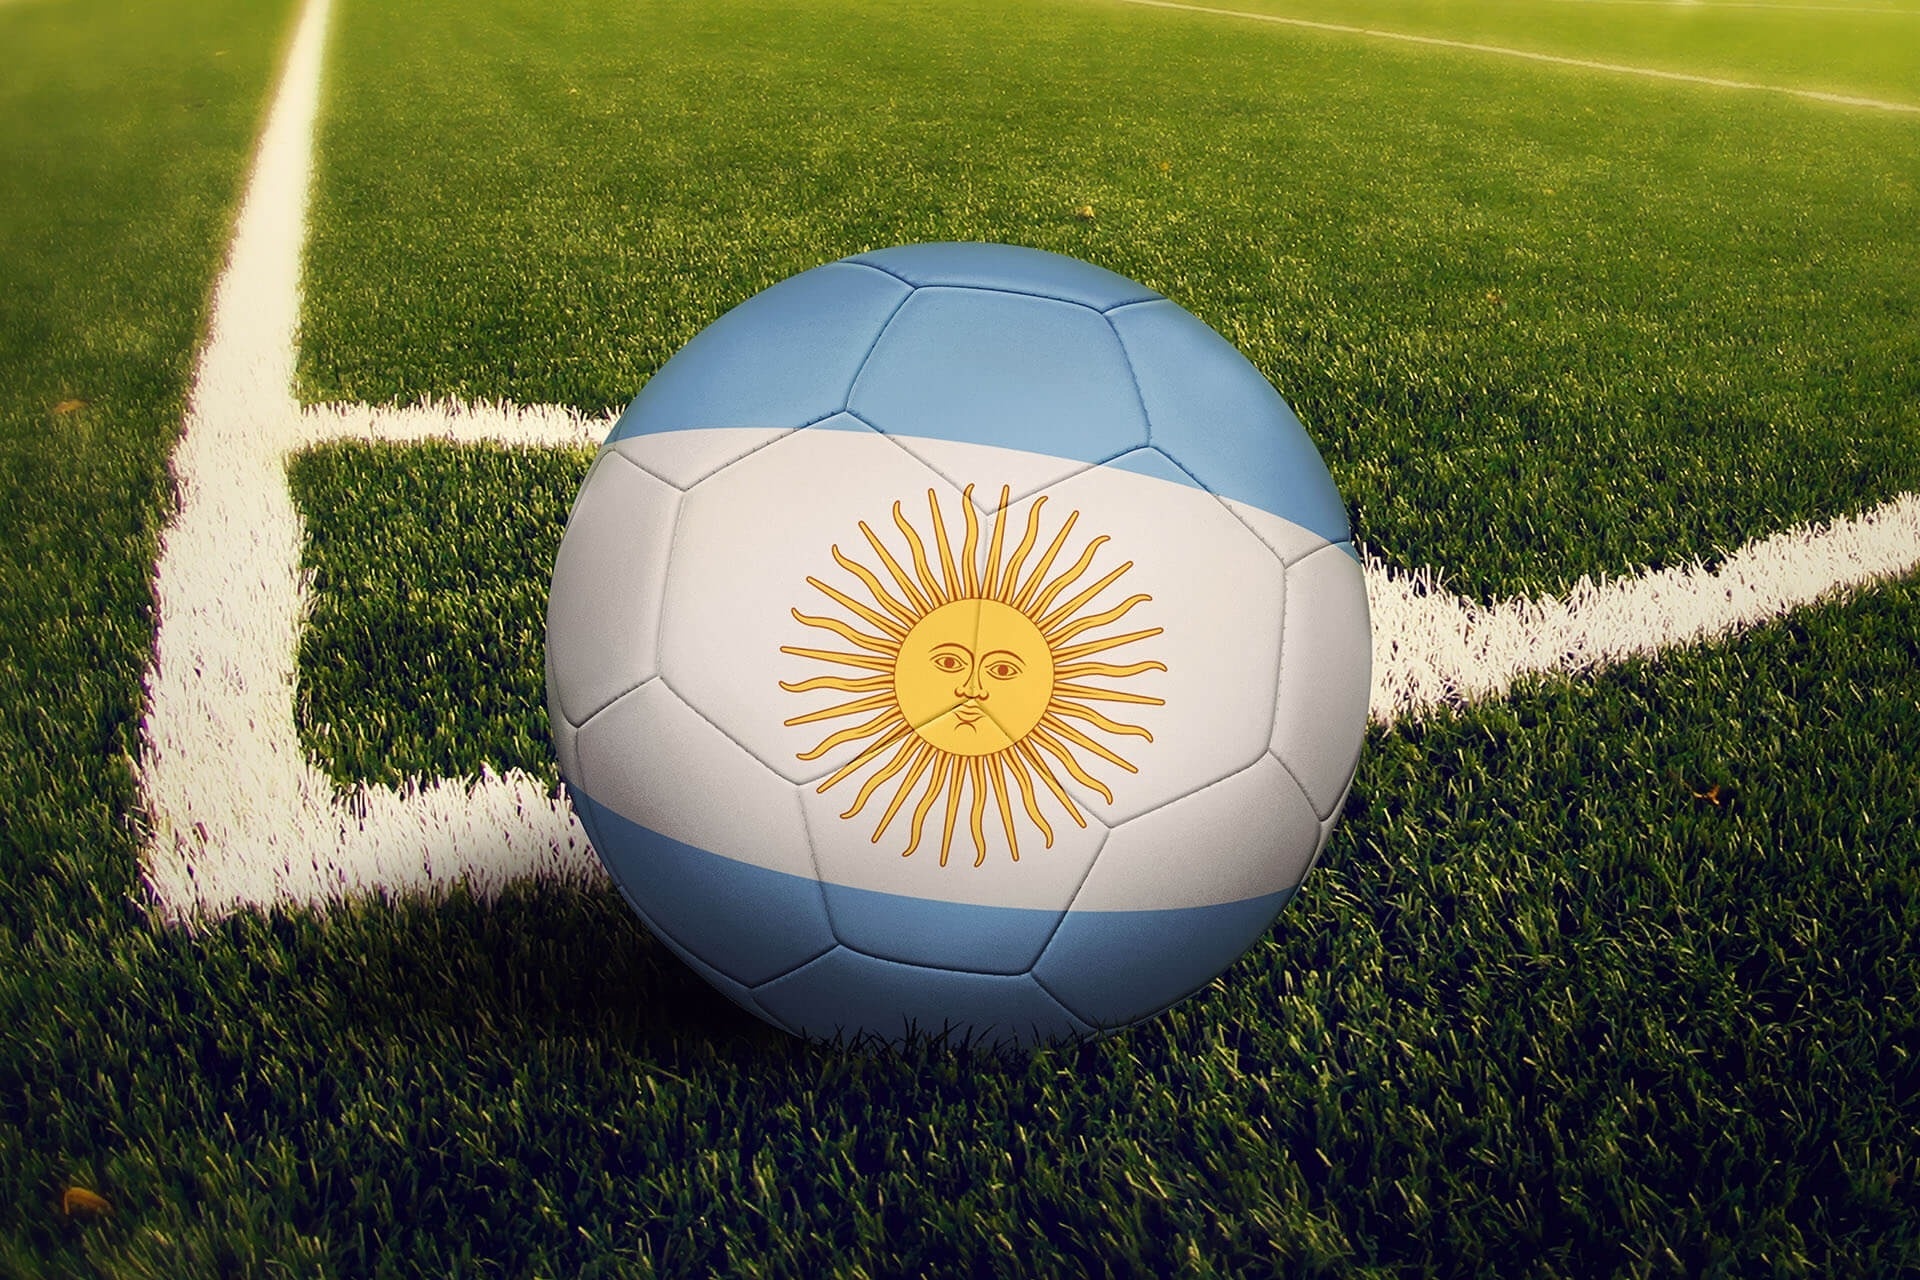 Soccer an Argentine passion